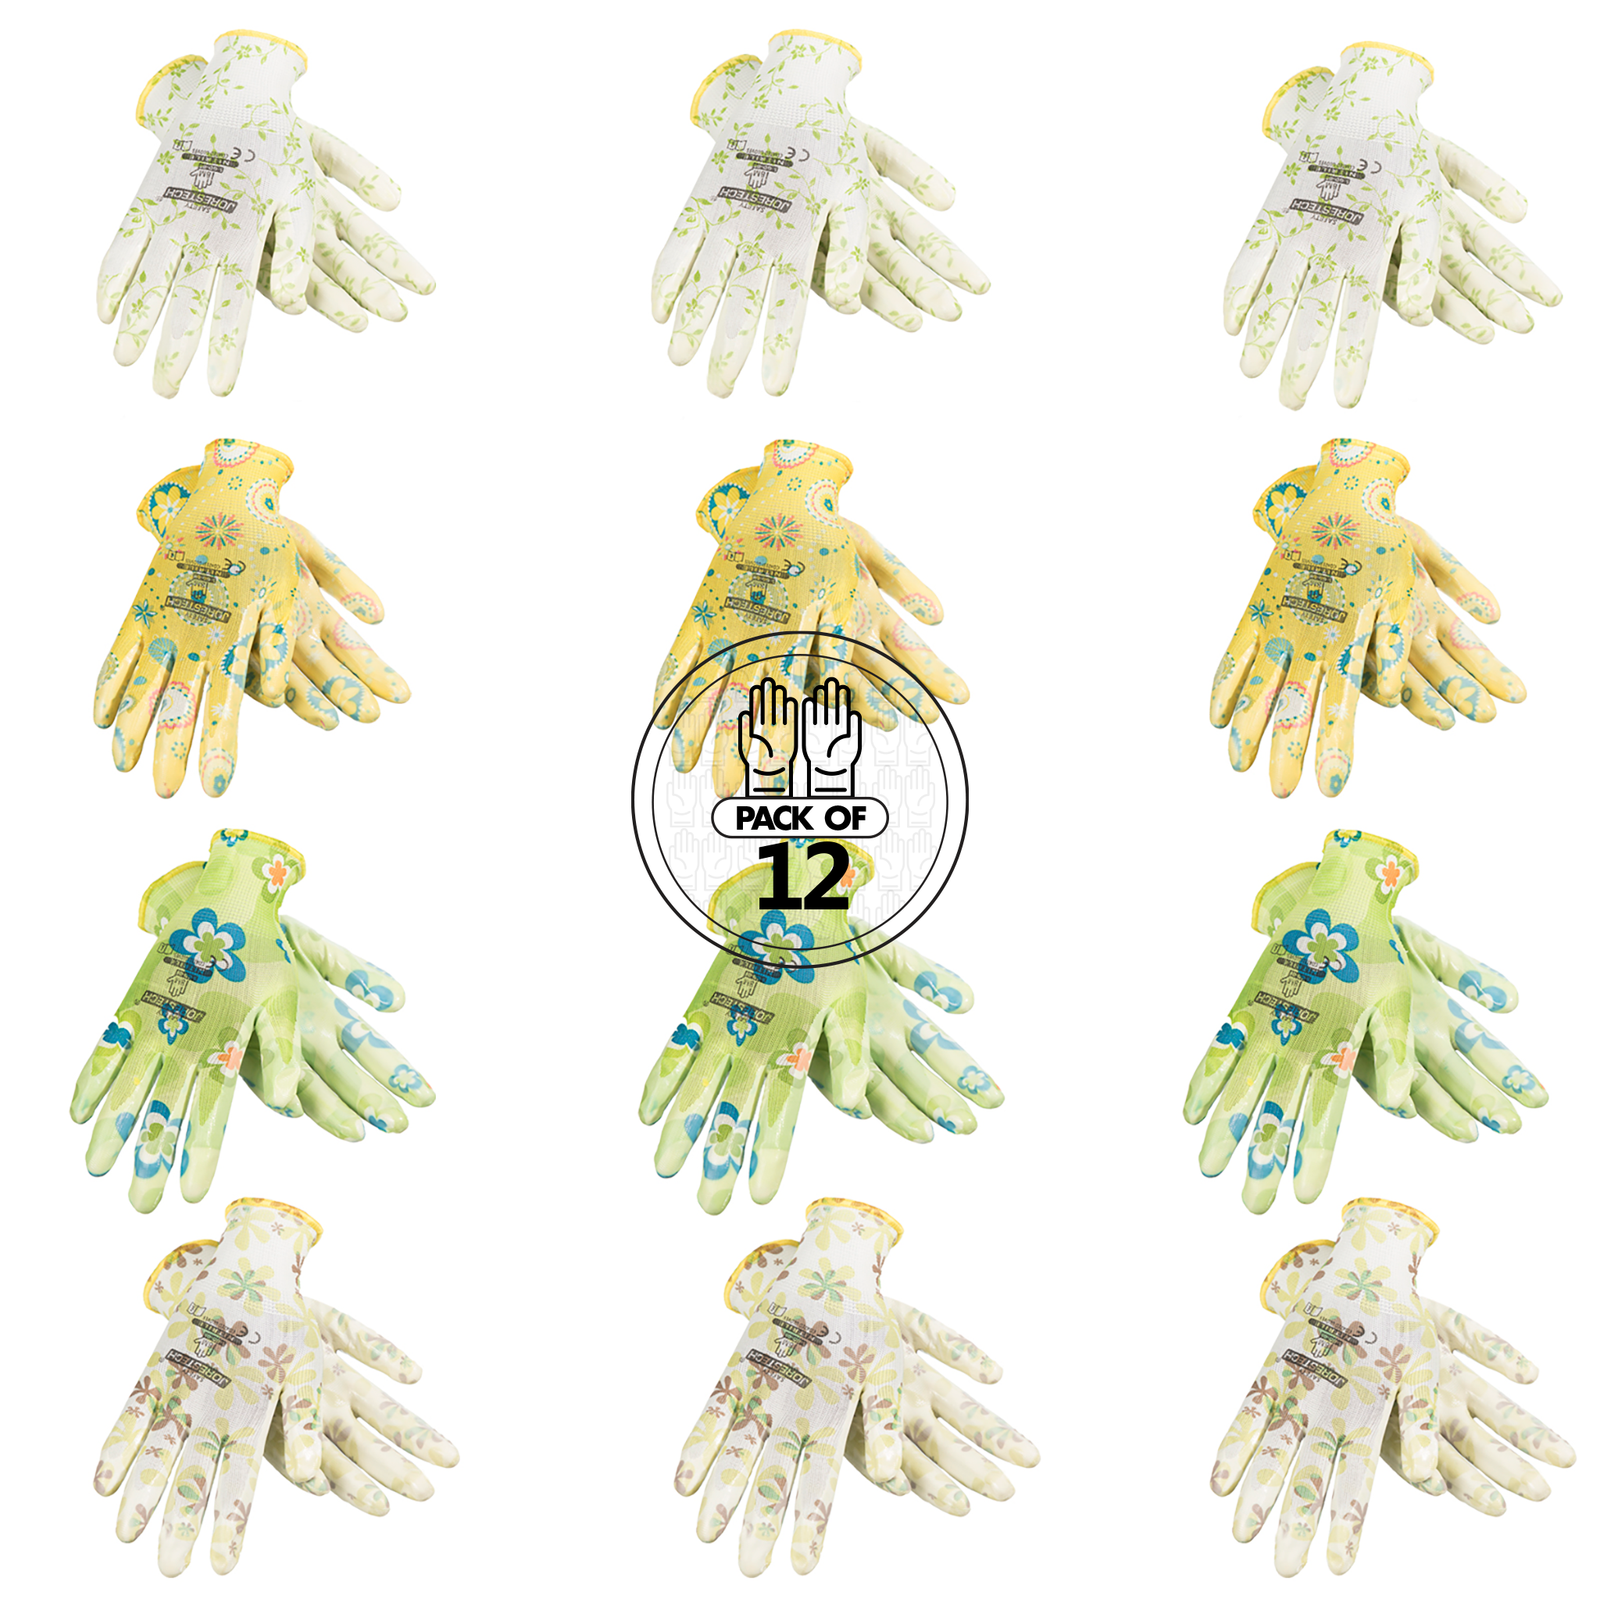 12 pairs of JORESTECH garden gloves with nitrile dipped palms. all pairs have motives of flowers in white, green, yellow, and blue